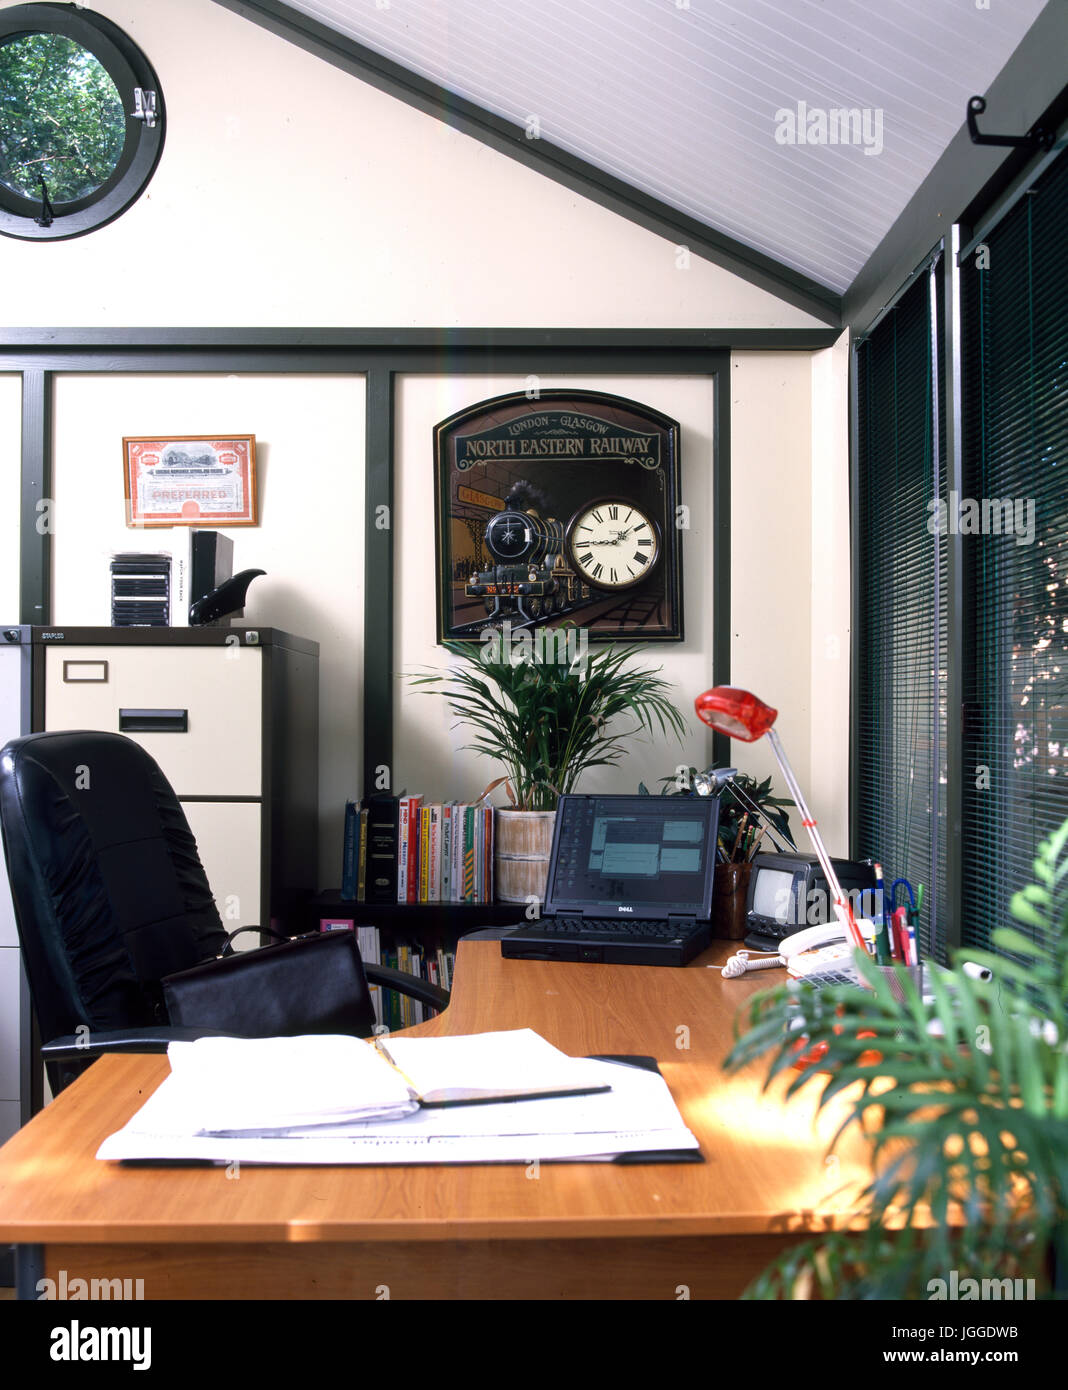 Inside a home office in the garden Stock Photo